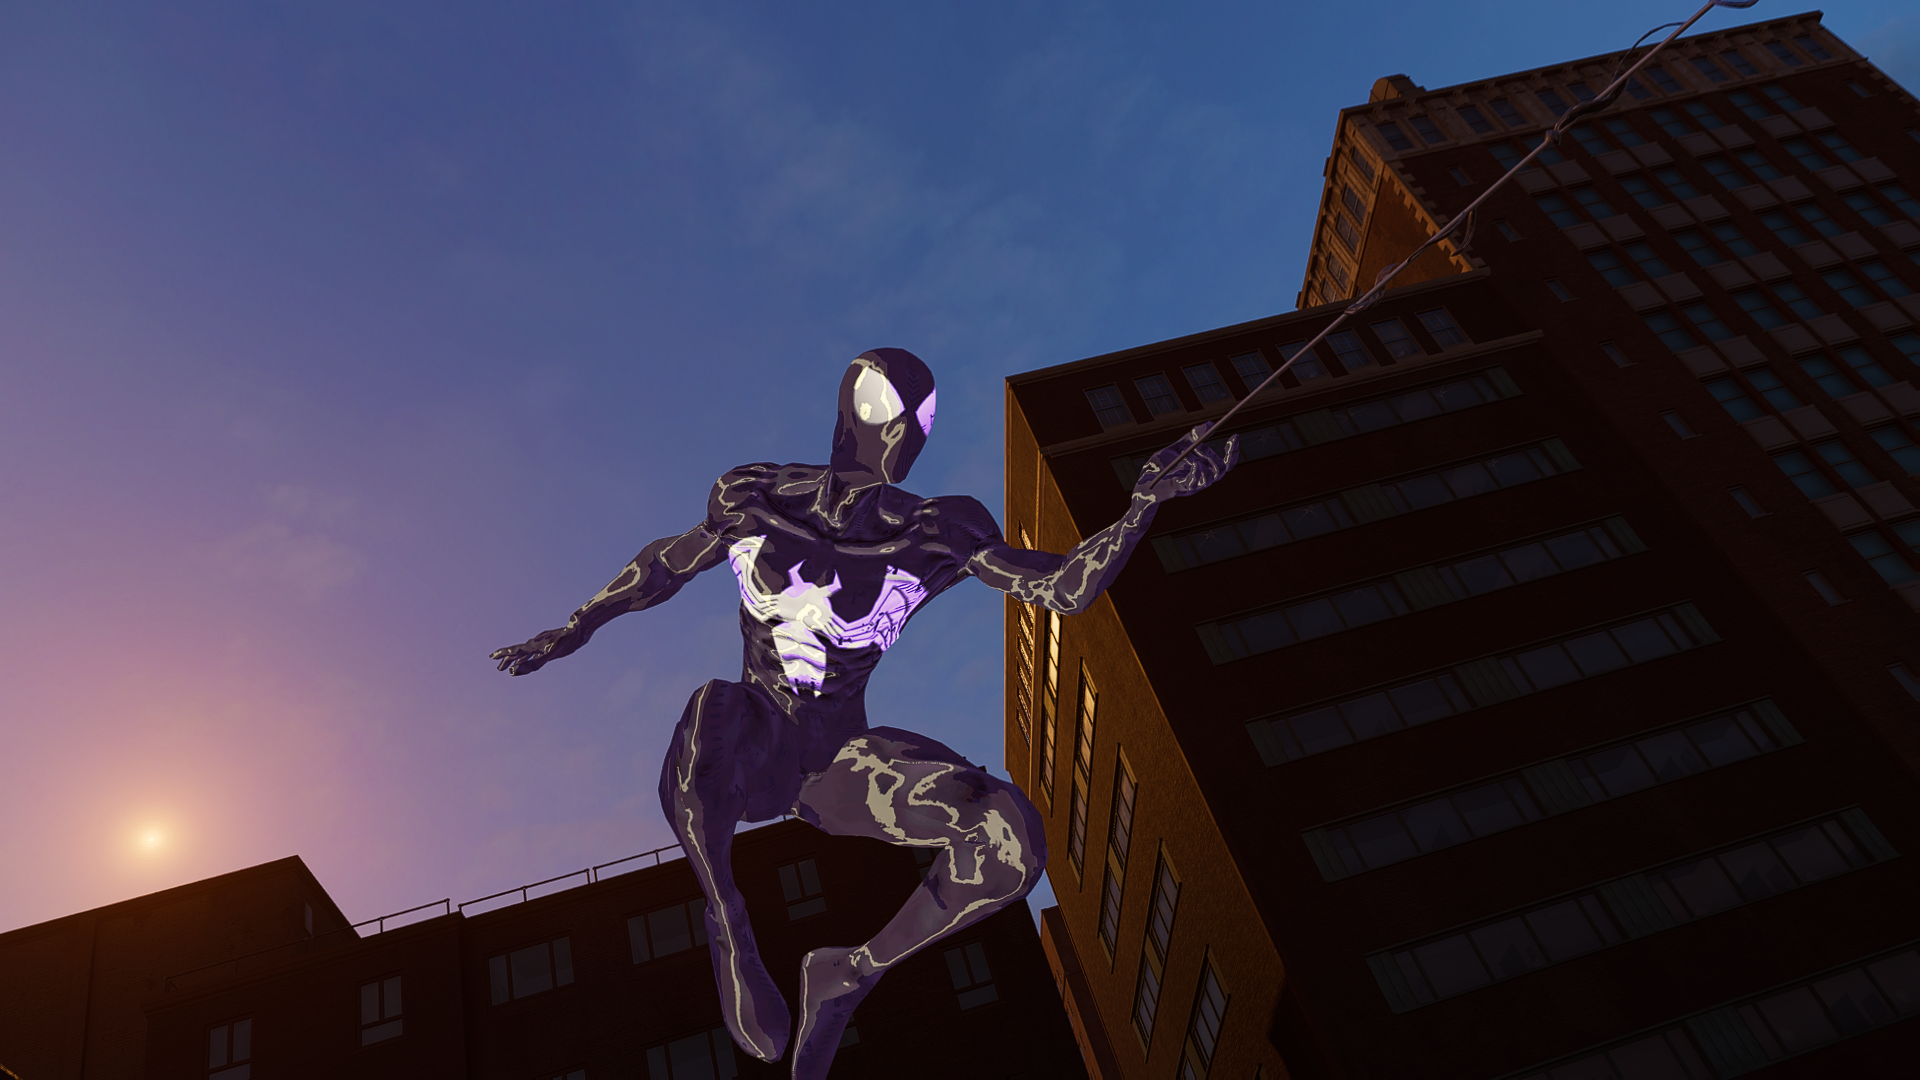 Web of Shadows Suits Remastered - Spider-Man Remastered Mods - CurseForge